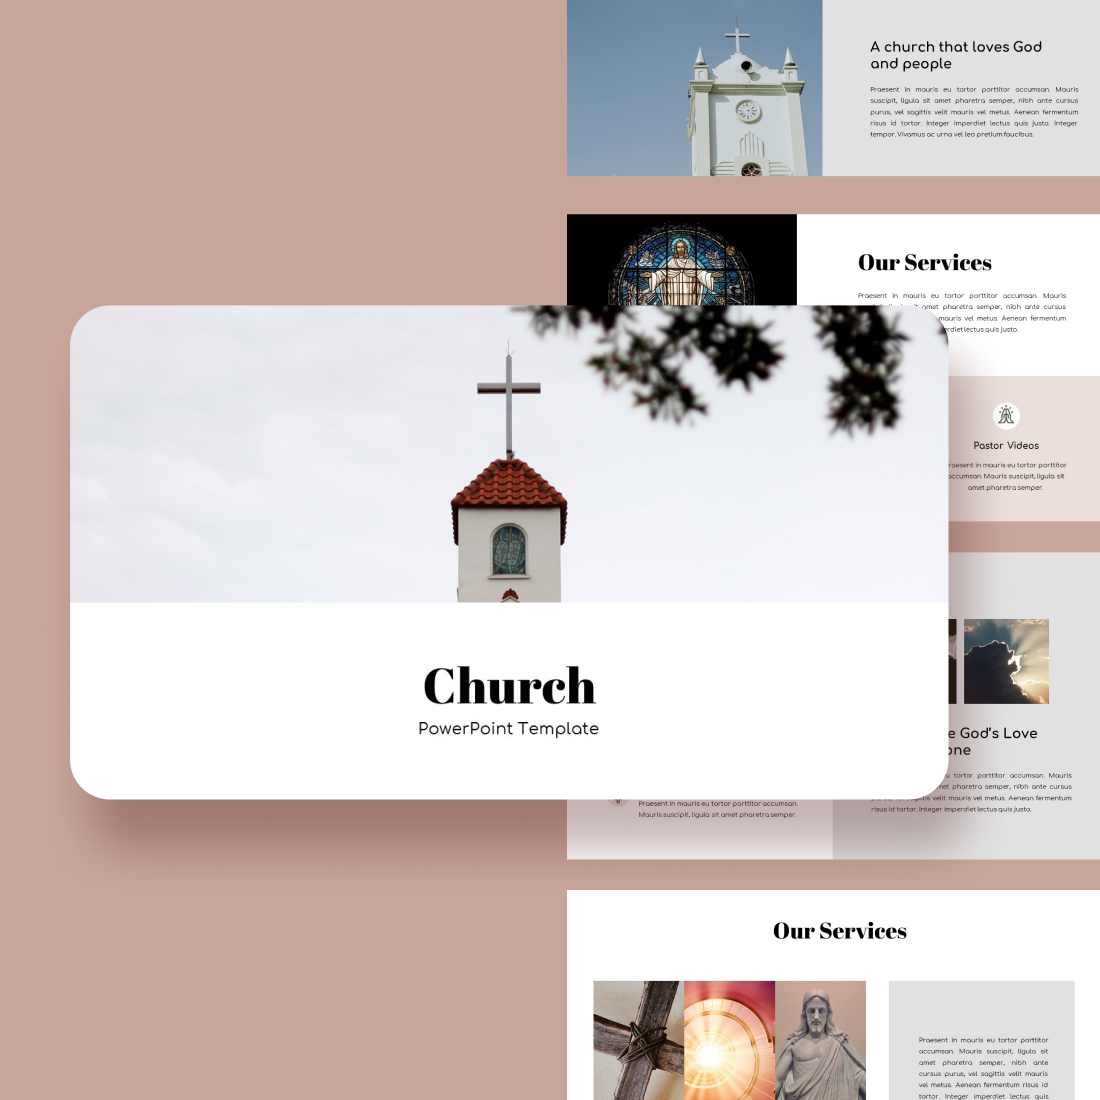 Church Powerpoint Presentation Template cover image.